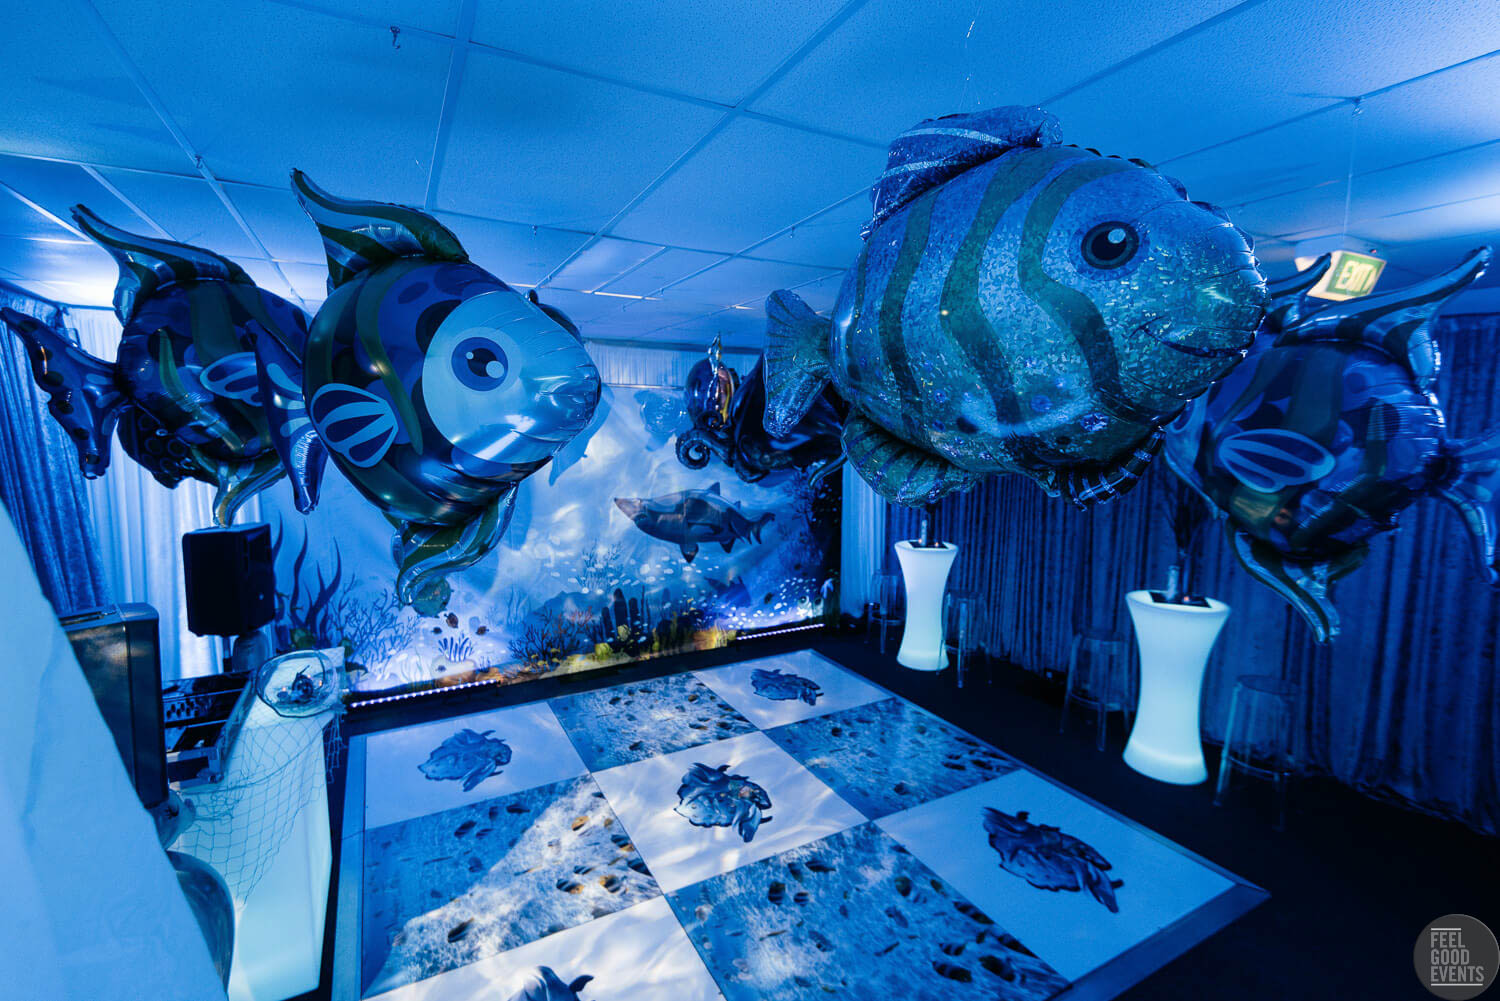 Under The Sea Party Theme, Feel Good Events